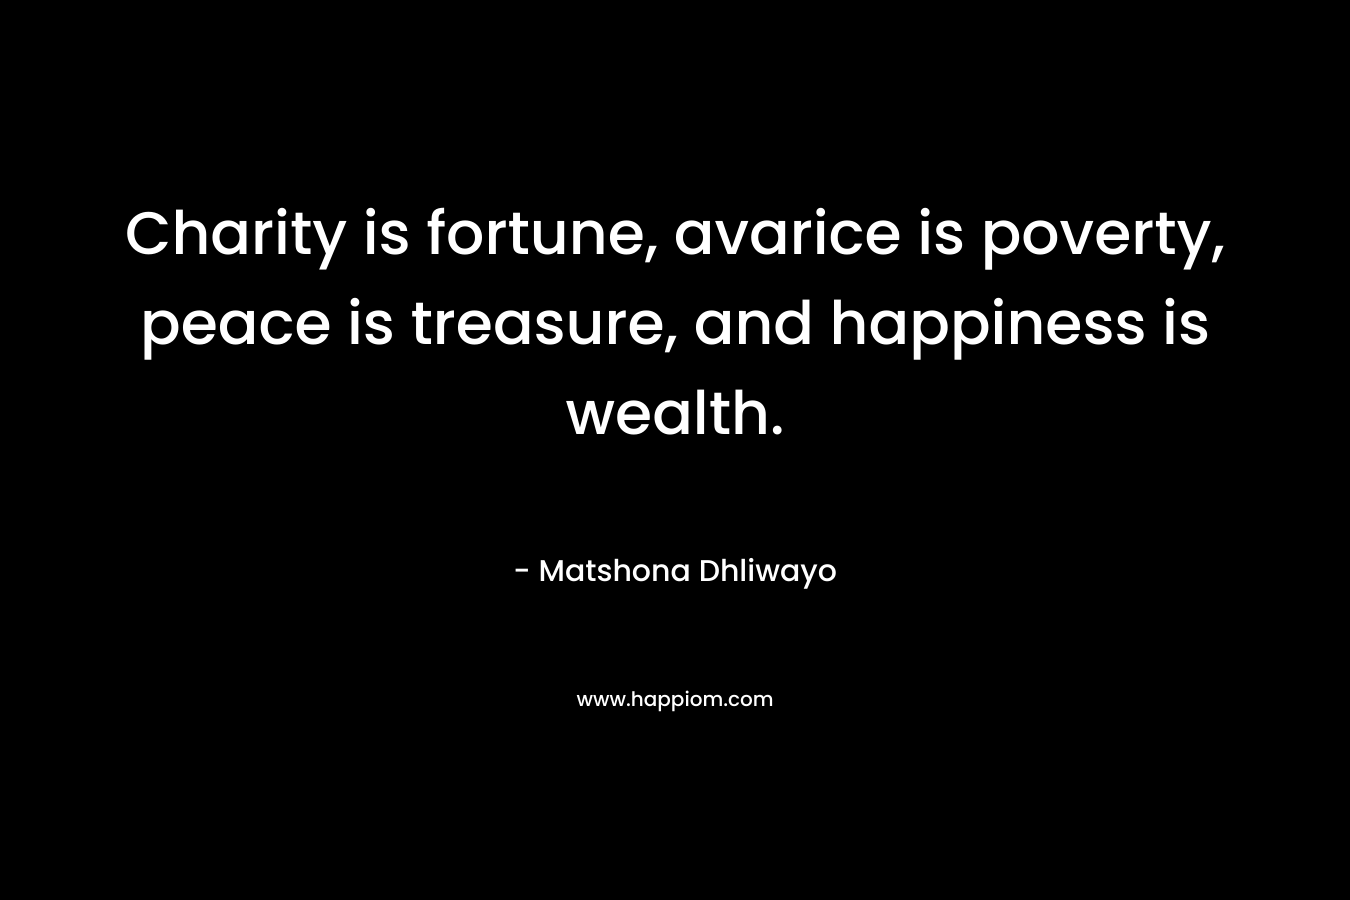 Charity is fortune, avarice is poverty, peace is treasure, and happiness is wealth.